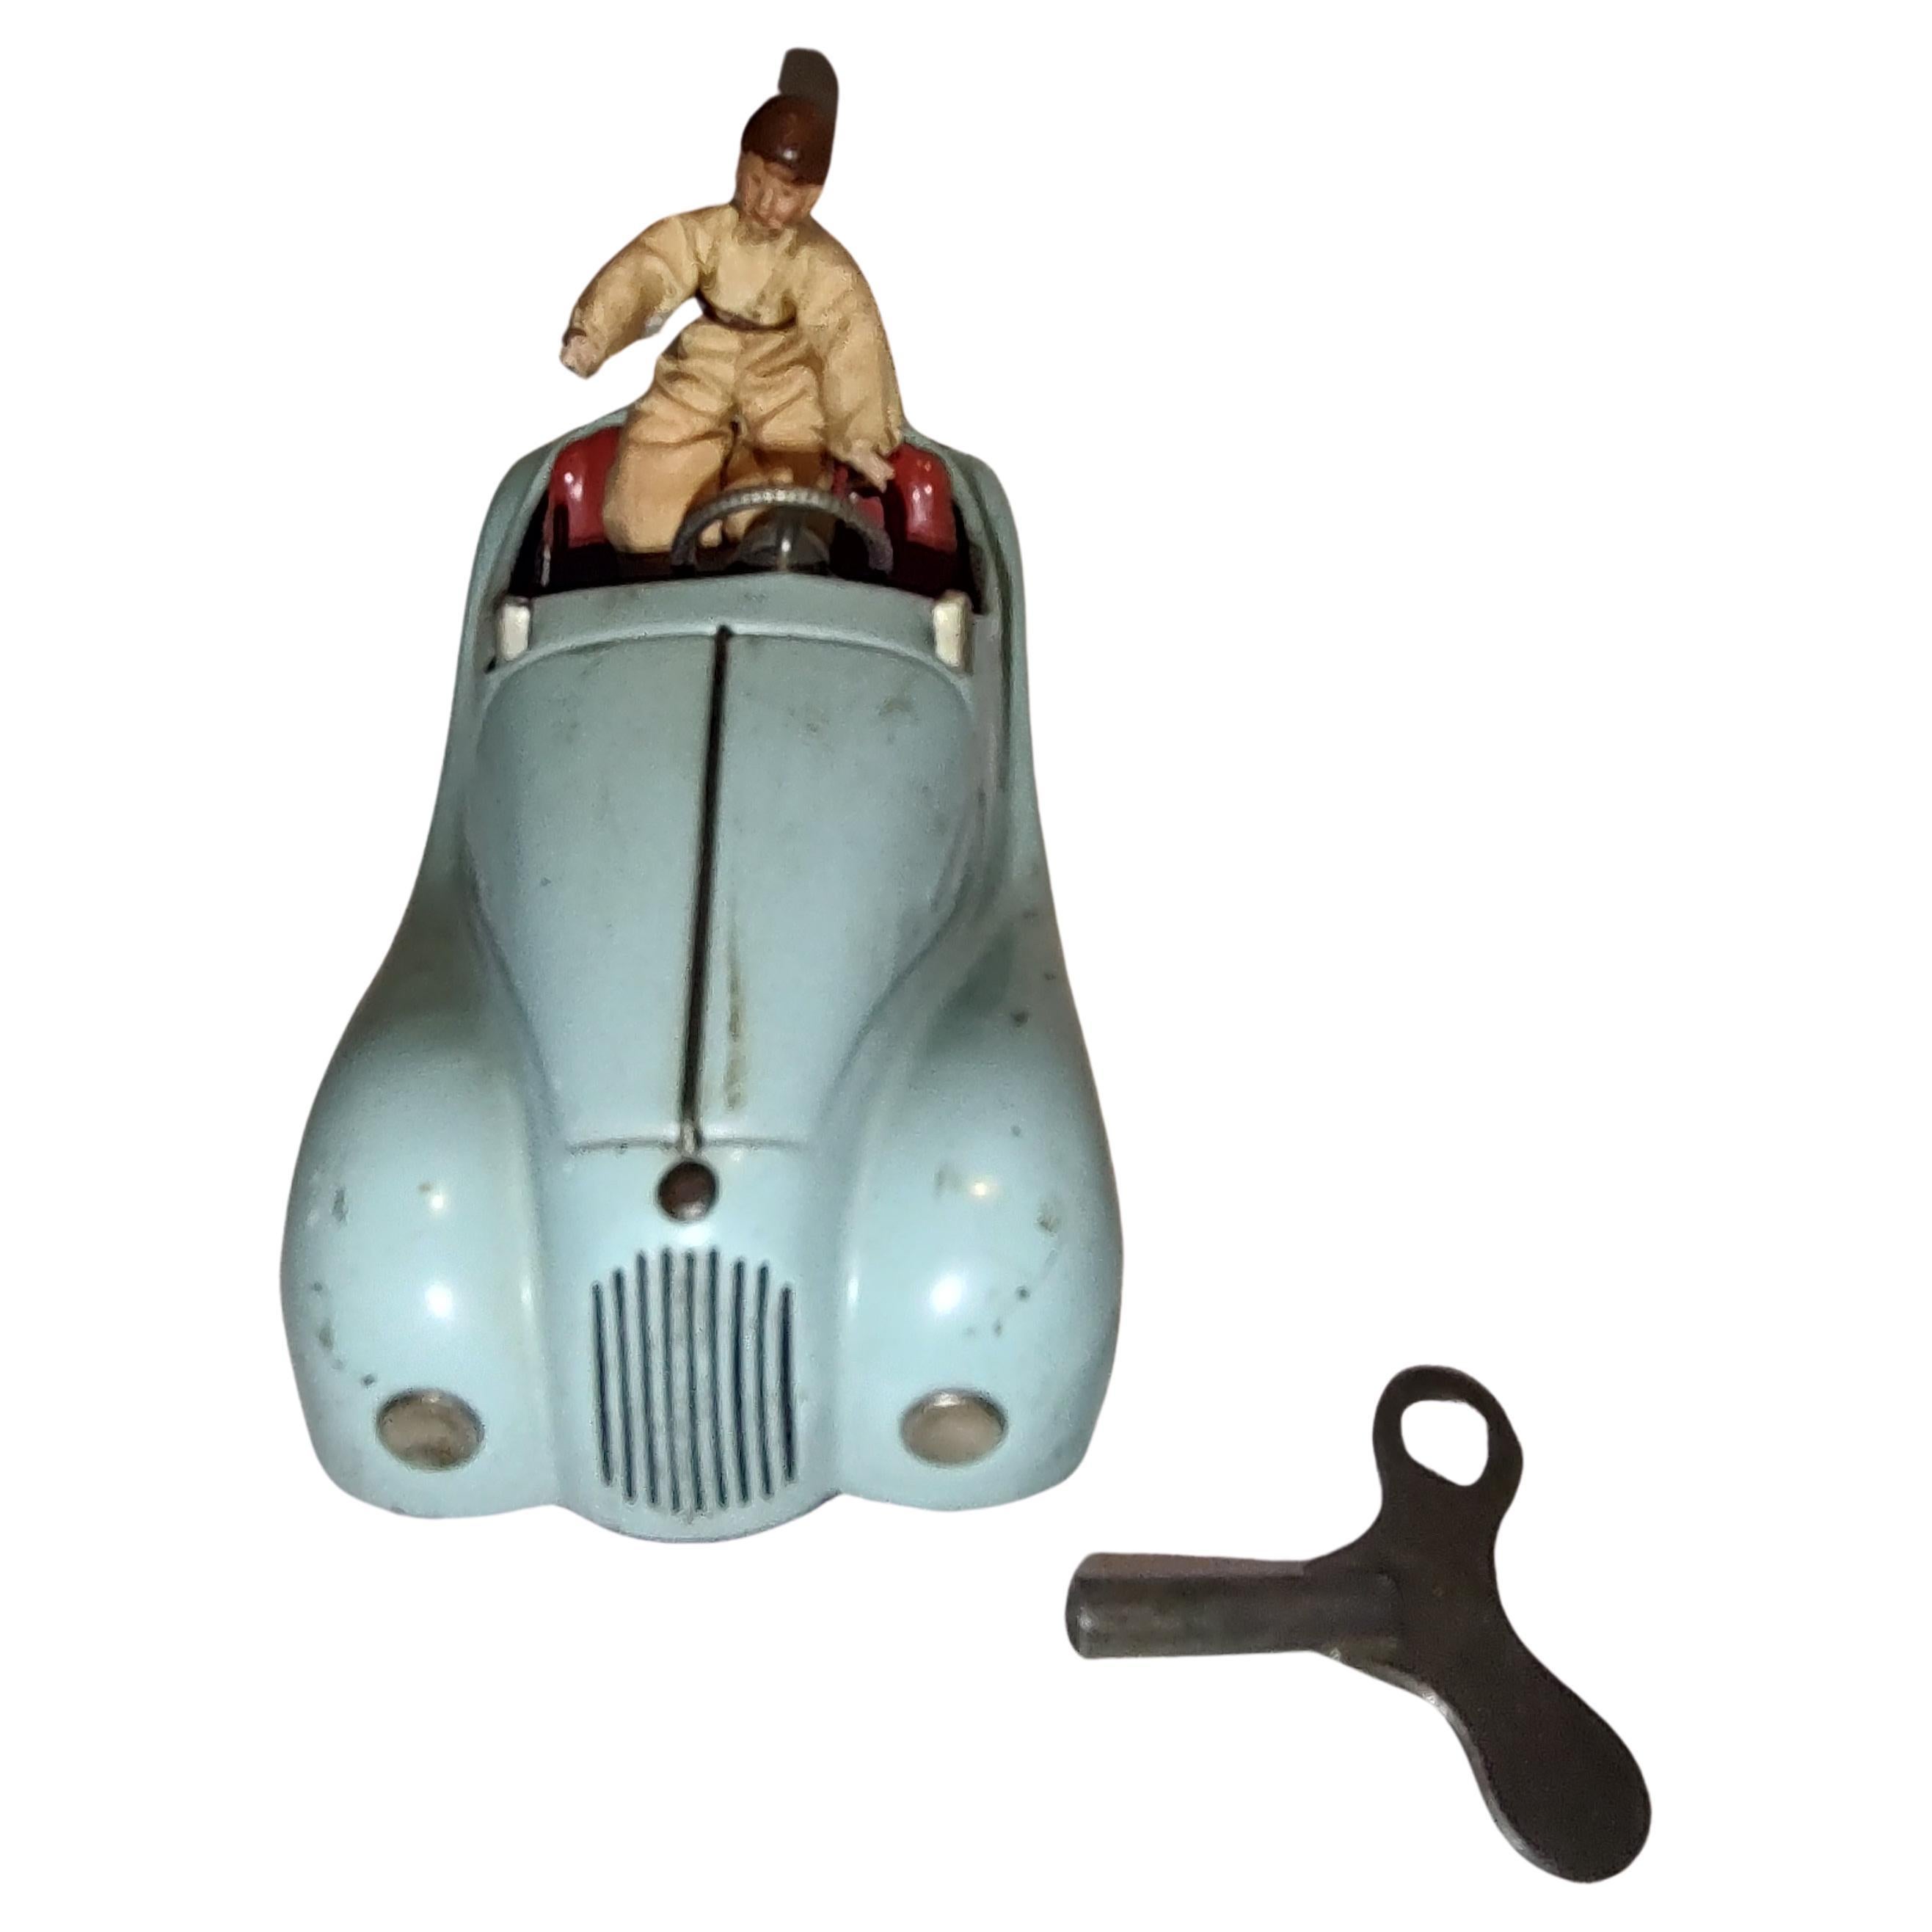 Fabulous toy windup by Schuco from the US Zone in Western Germany from the fifties. Unique toy car as it has two windup mechanisms, one to power the car, and the other for the Horn which honks. Has a gear shifter and the steering wheel turns the